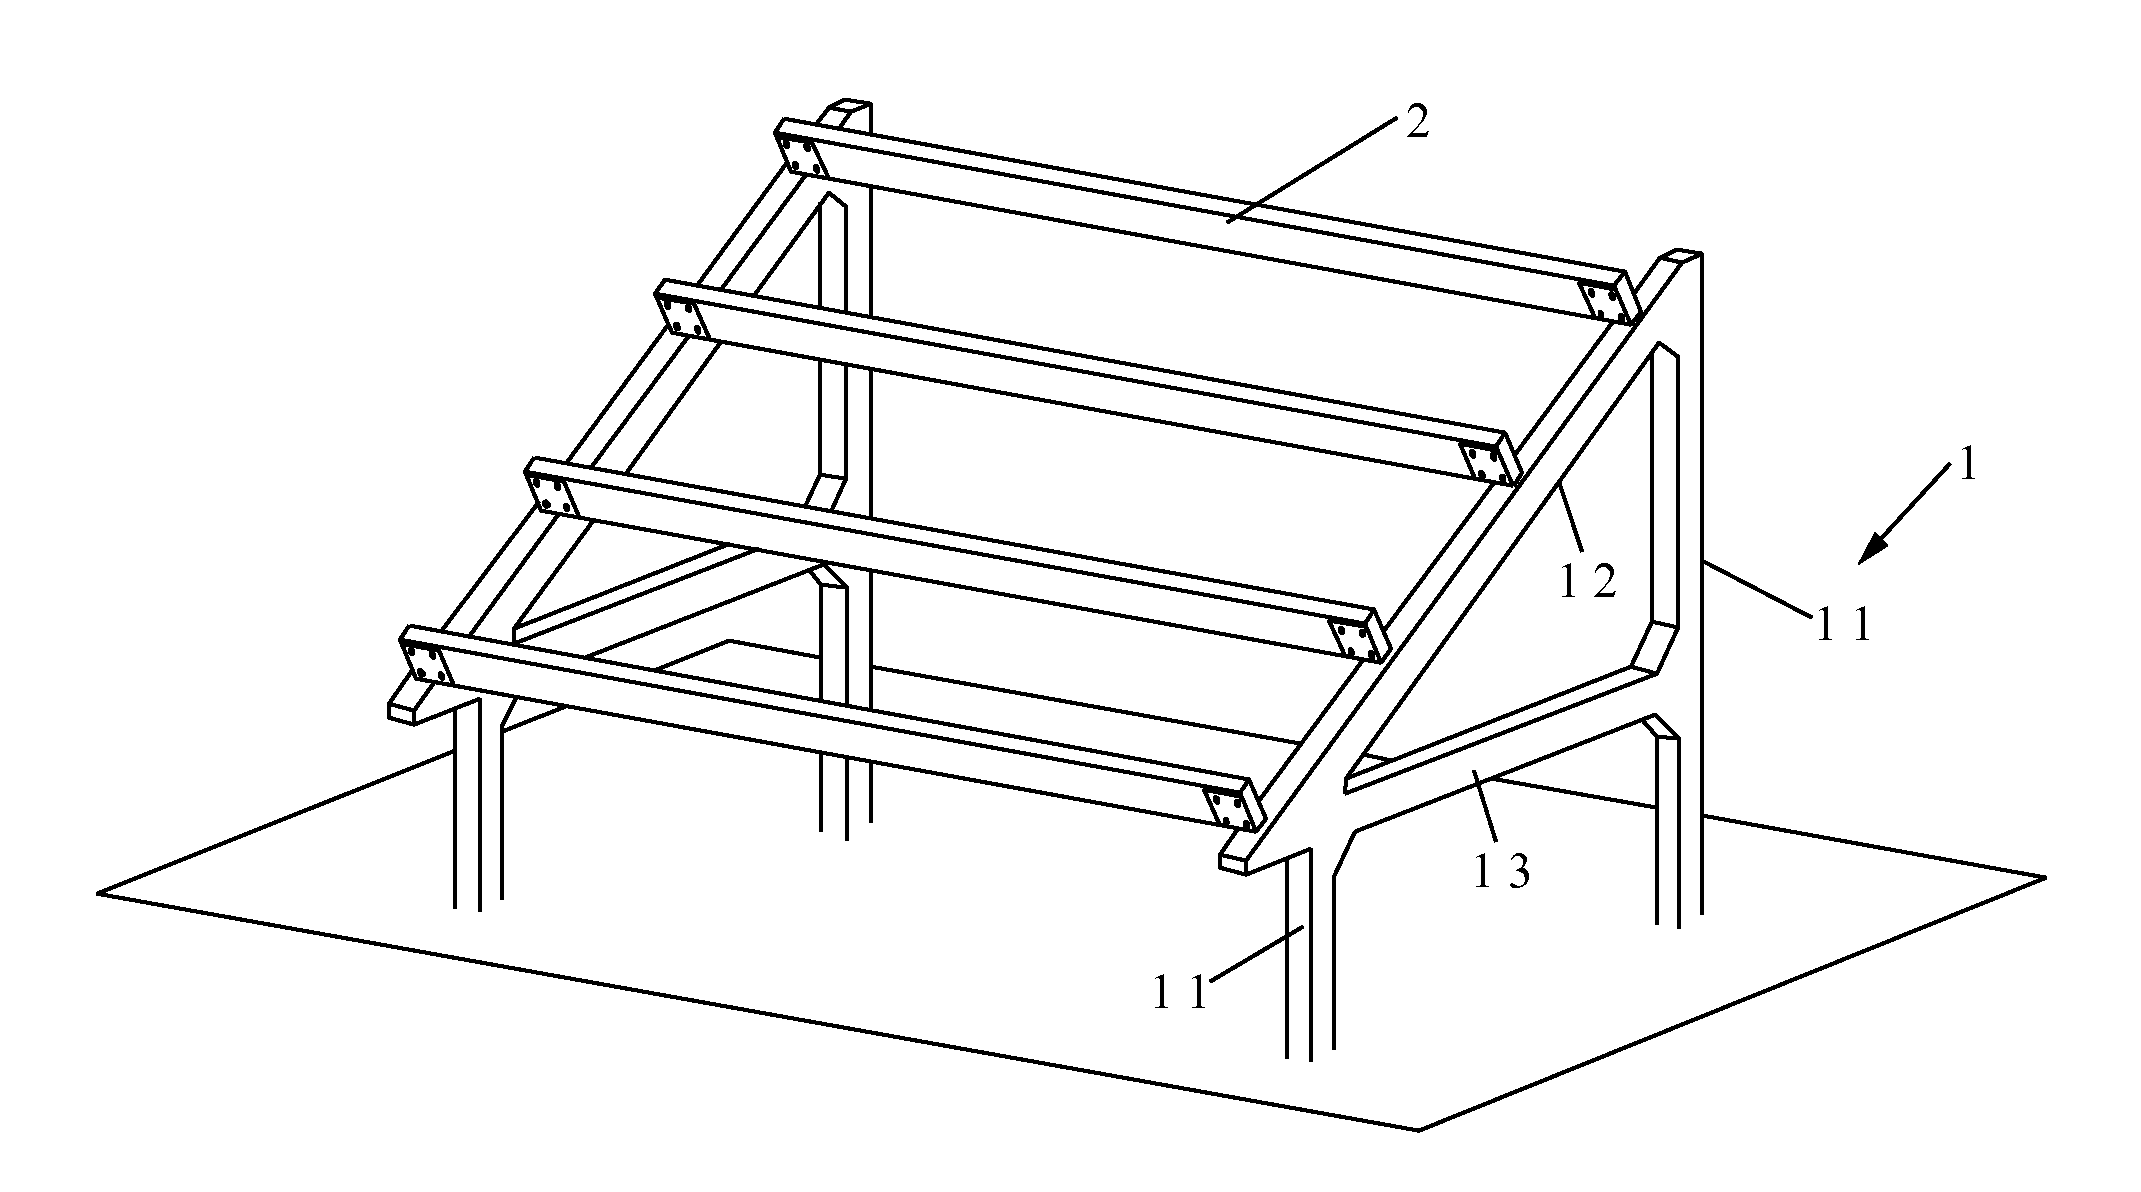 Support frame for solar energy device